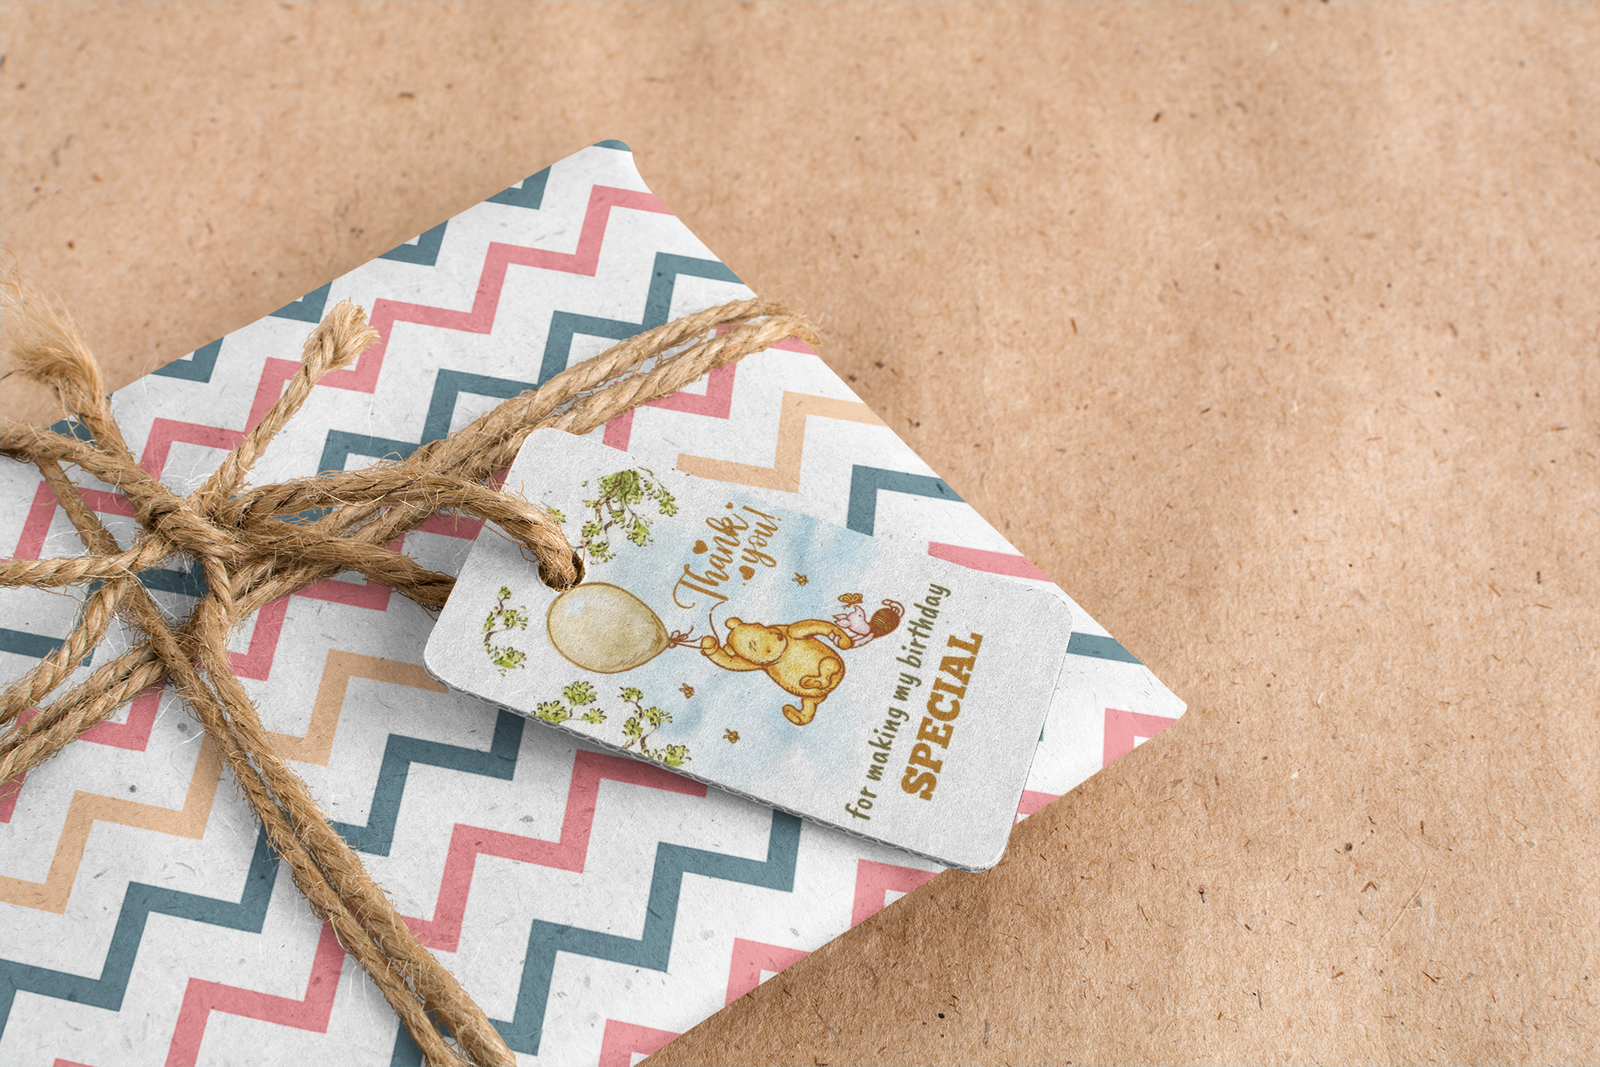 Winnie The Pooh Theme Birthday Favour Tags (2 x 3.5 inches/250 GSM Cardstock/Green, Brown, Light blue, White/30Pcs)